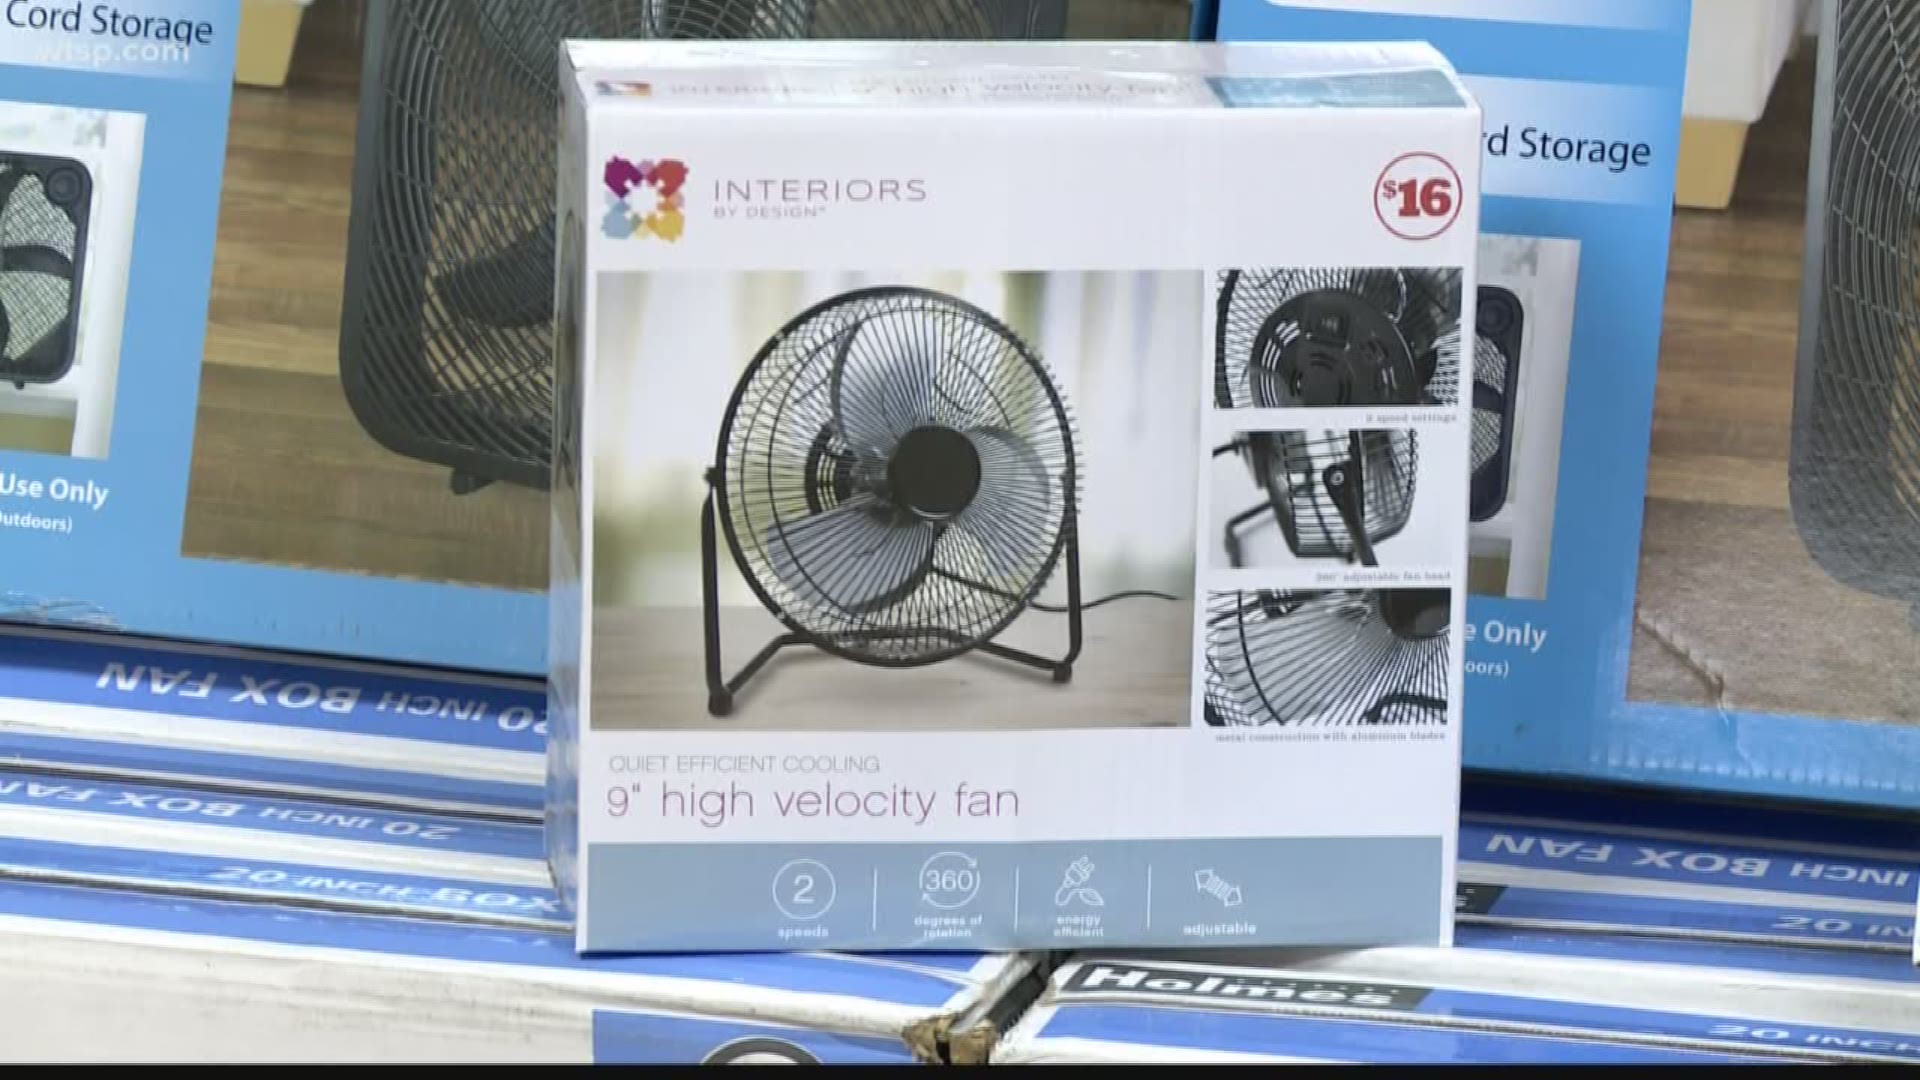 The Annals of Internal Medicine says using a fan in hot and dry climates can actually increase the body temperature and strain the heart. But, in a hot and humid climate like Florida, fans were able to lower body core temperature and reduced heat-related strain on the heart.
Researchers say this proves that fans work better at higher heat index temperatures.
We should mention that only 12 men were evaluated for this study.